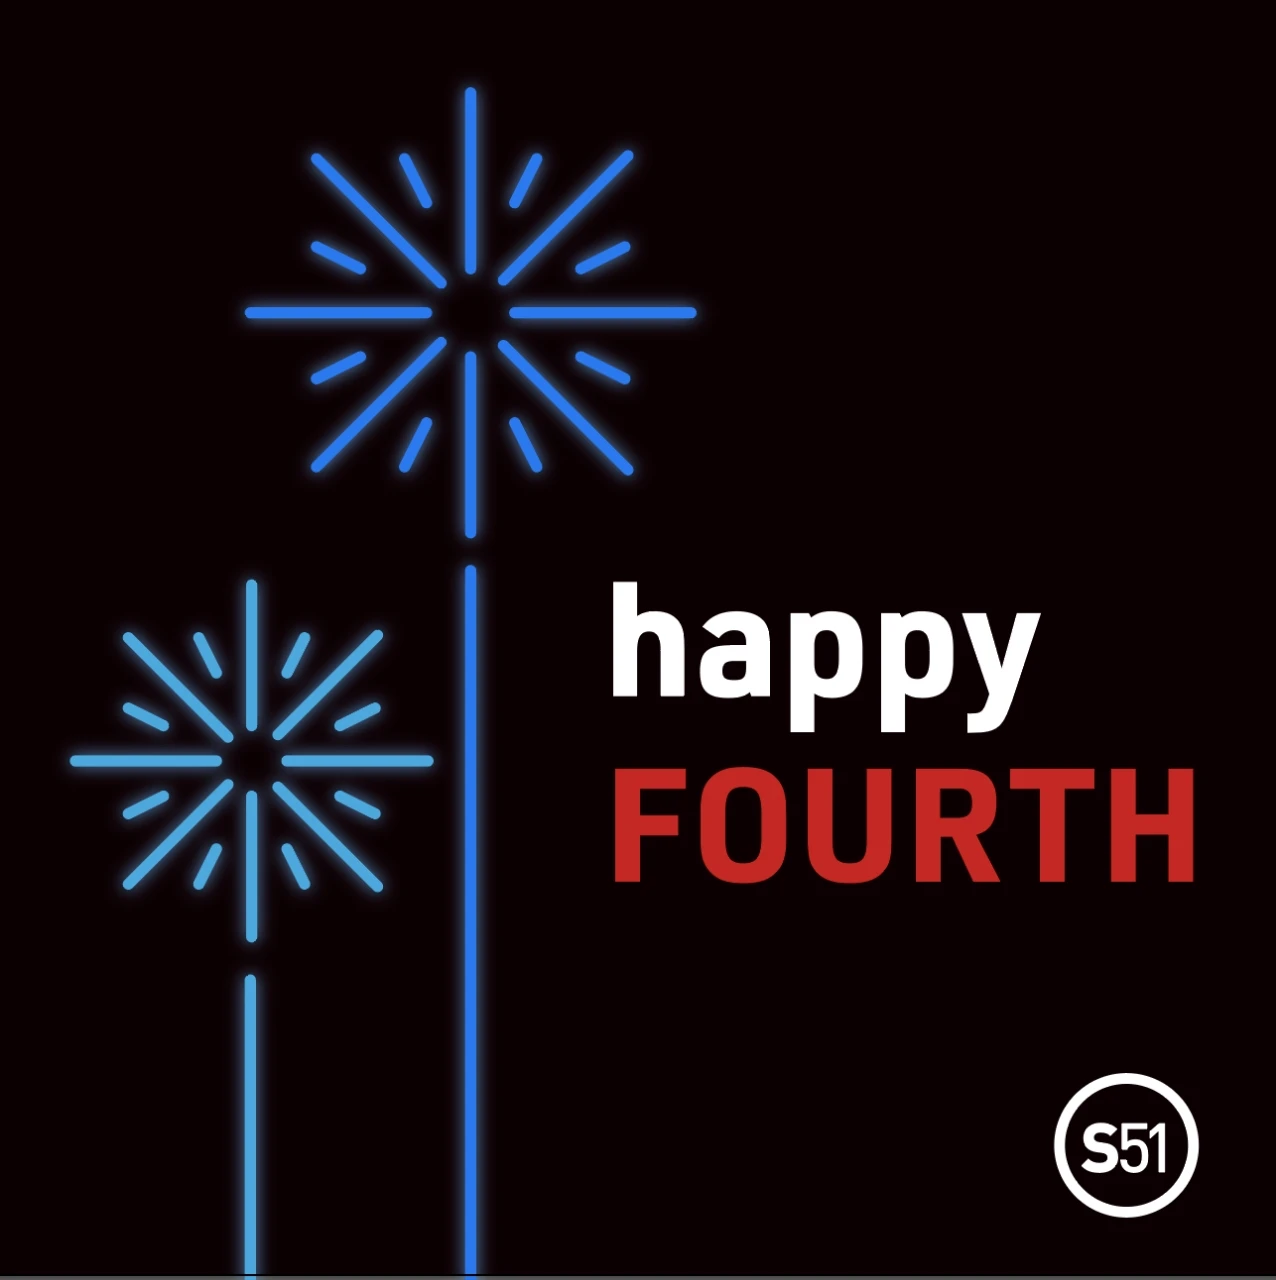 A happy fourth of july card with fireworks and the words happy fourth of july.